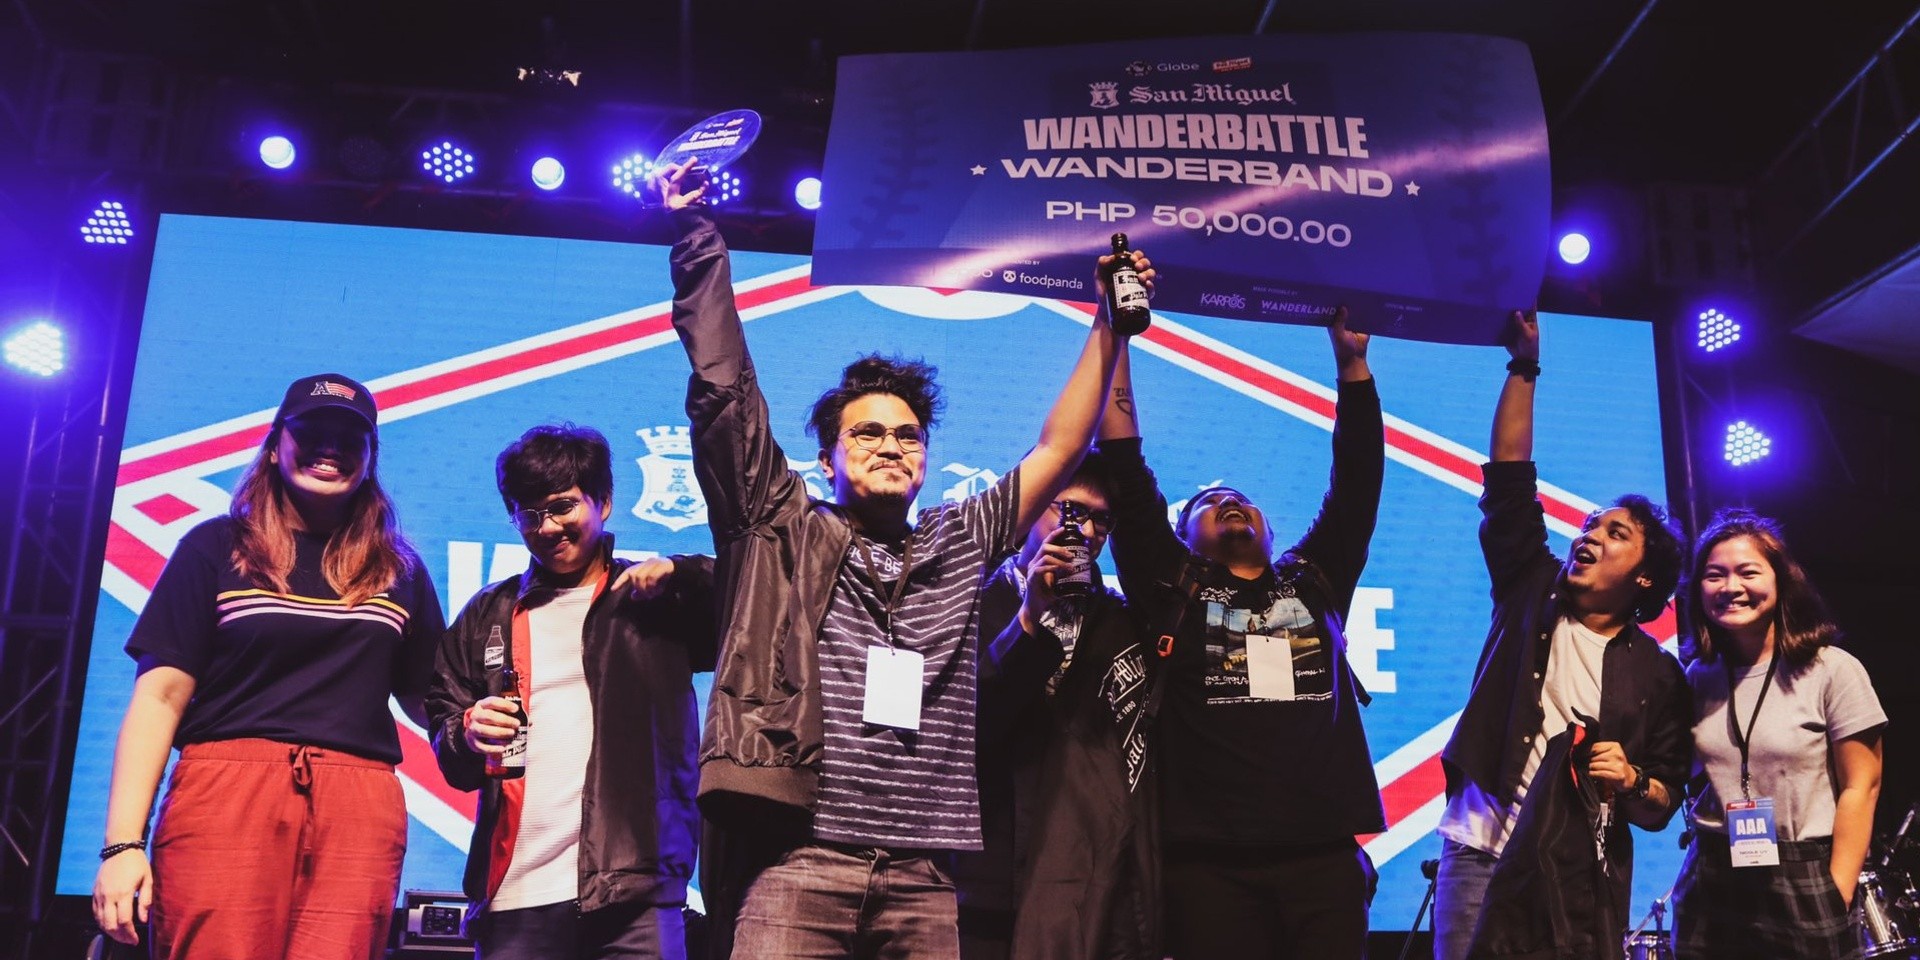 Wanderband champs The Sundown and runners-up Morobe are playing the Wanderland 2020 stage